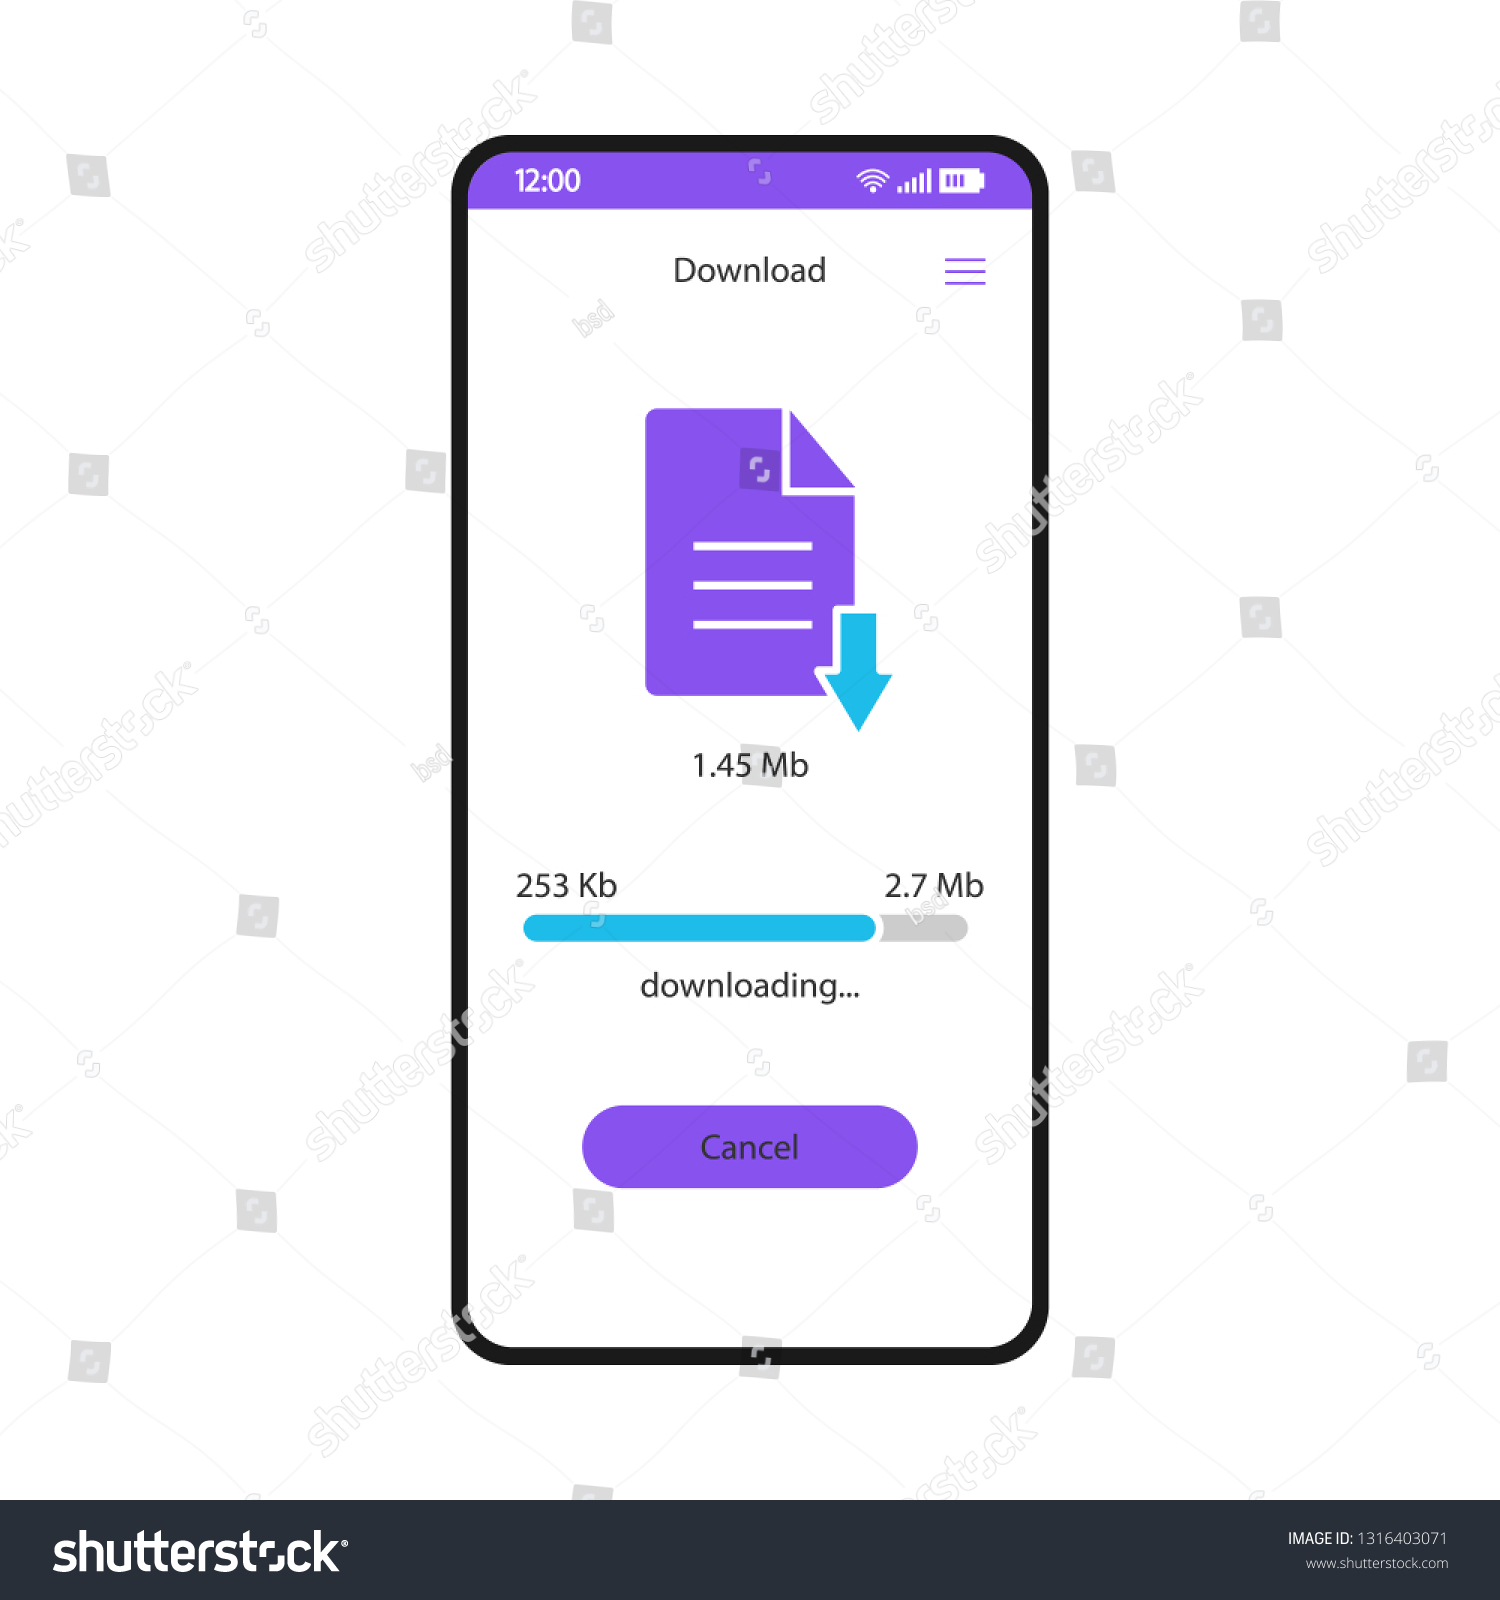 Download File Manager Smartphone Interface Vector Template Mobile Storage App Page White Design Layout Document Downloading Process Application Screen Online Data Saver Flat Ui On Phone Display